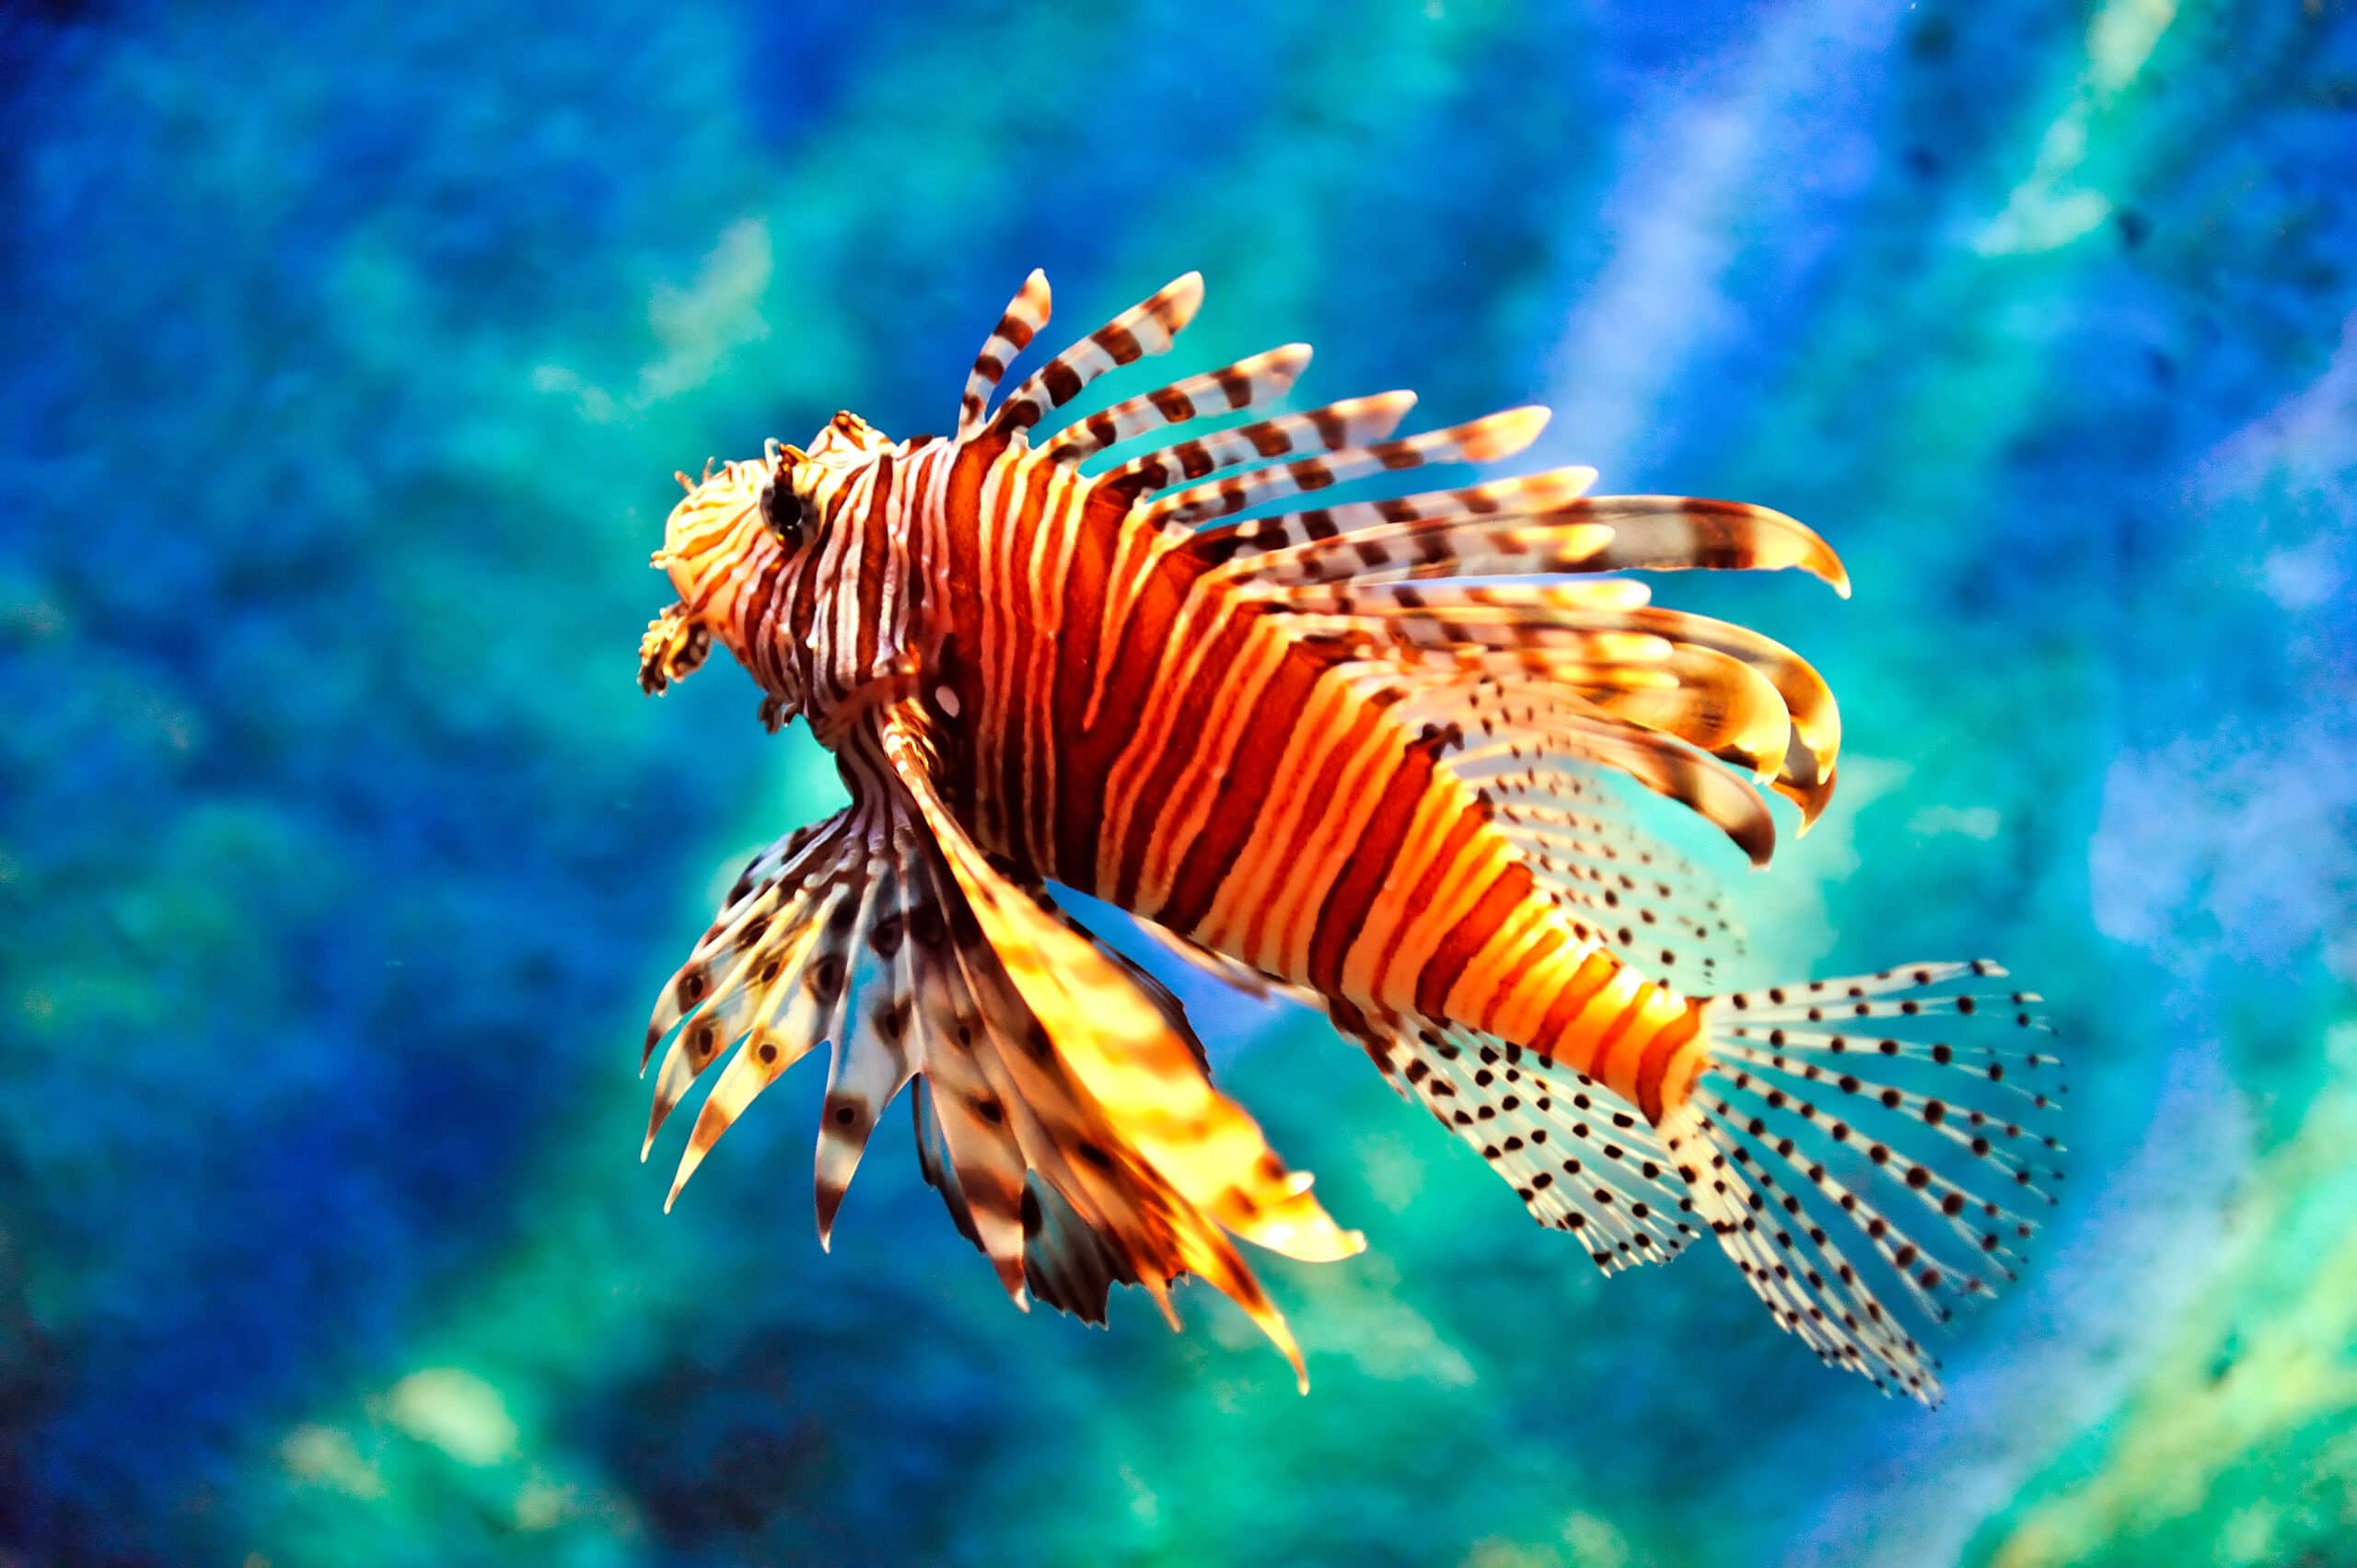 The remarkable Lionfish